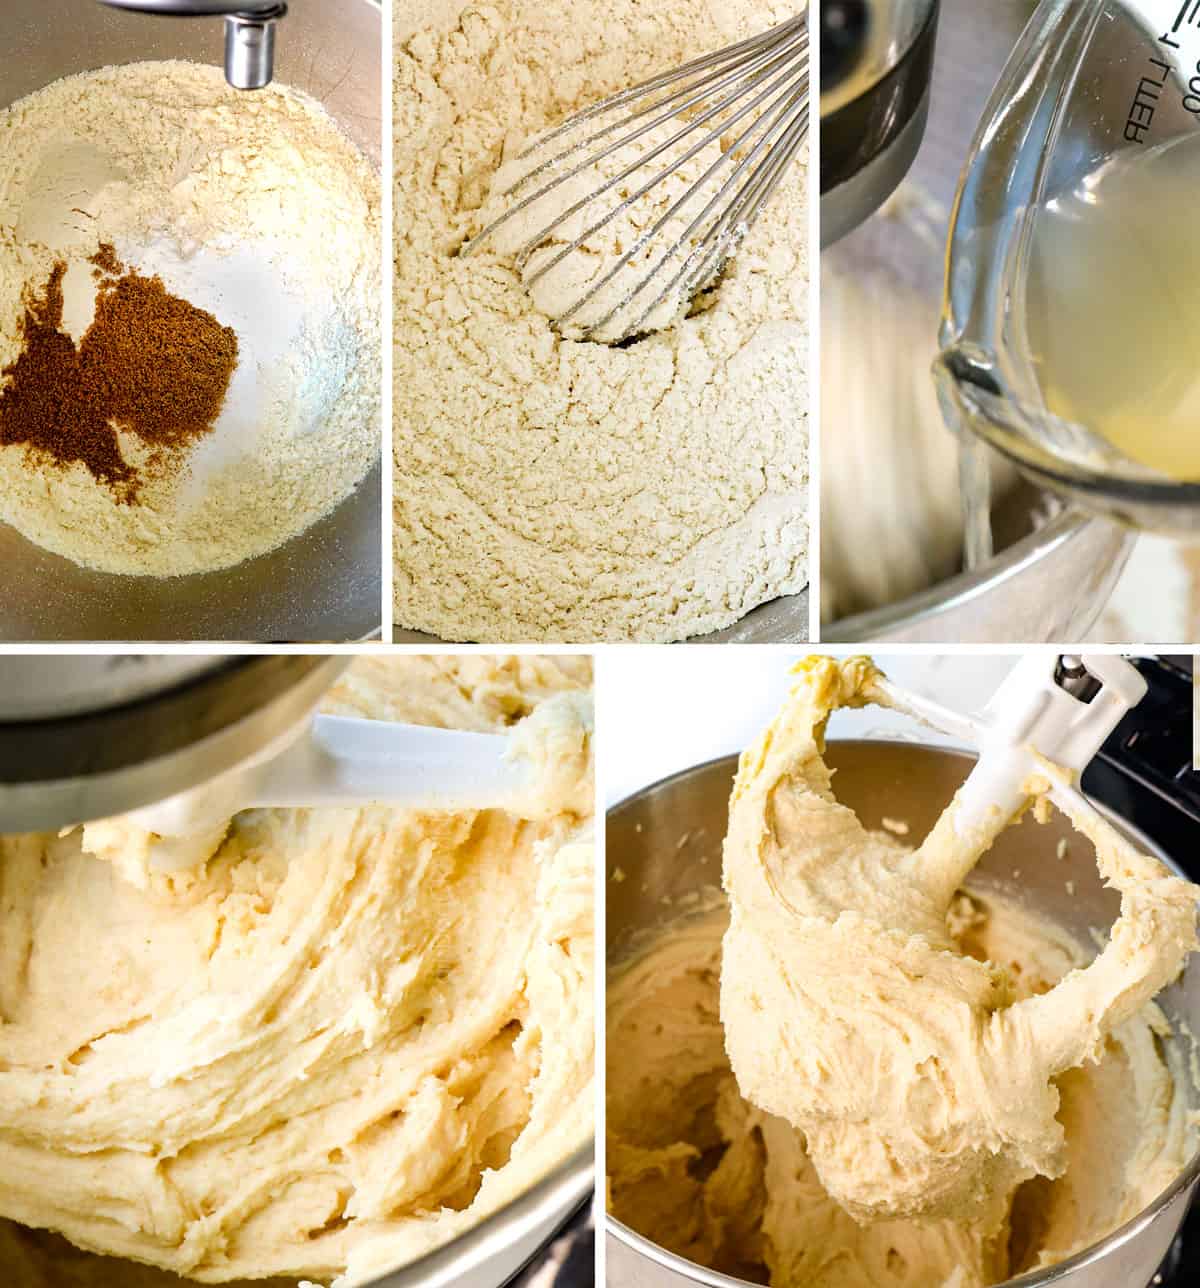 a collage showing how to make tamales by 1) whisking together masa harina and oil, then mixing until fluffy